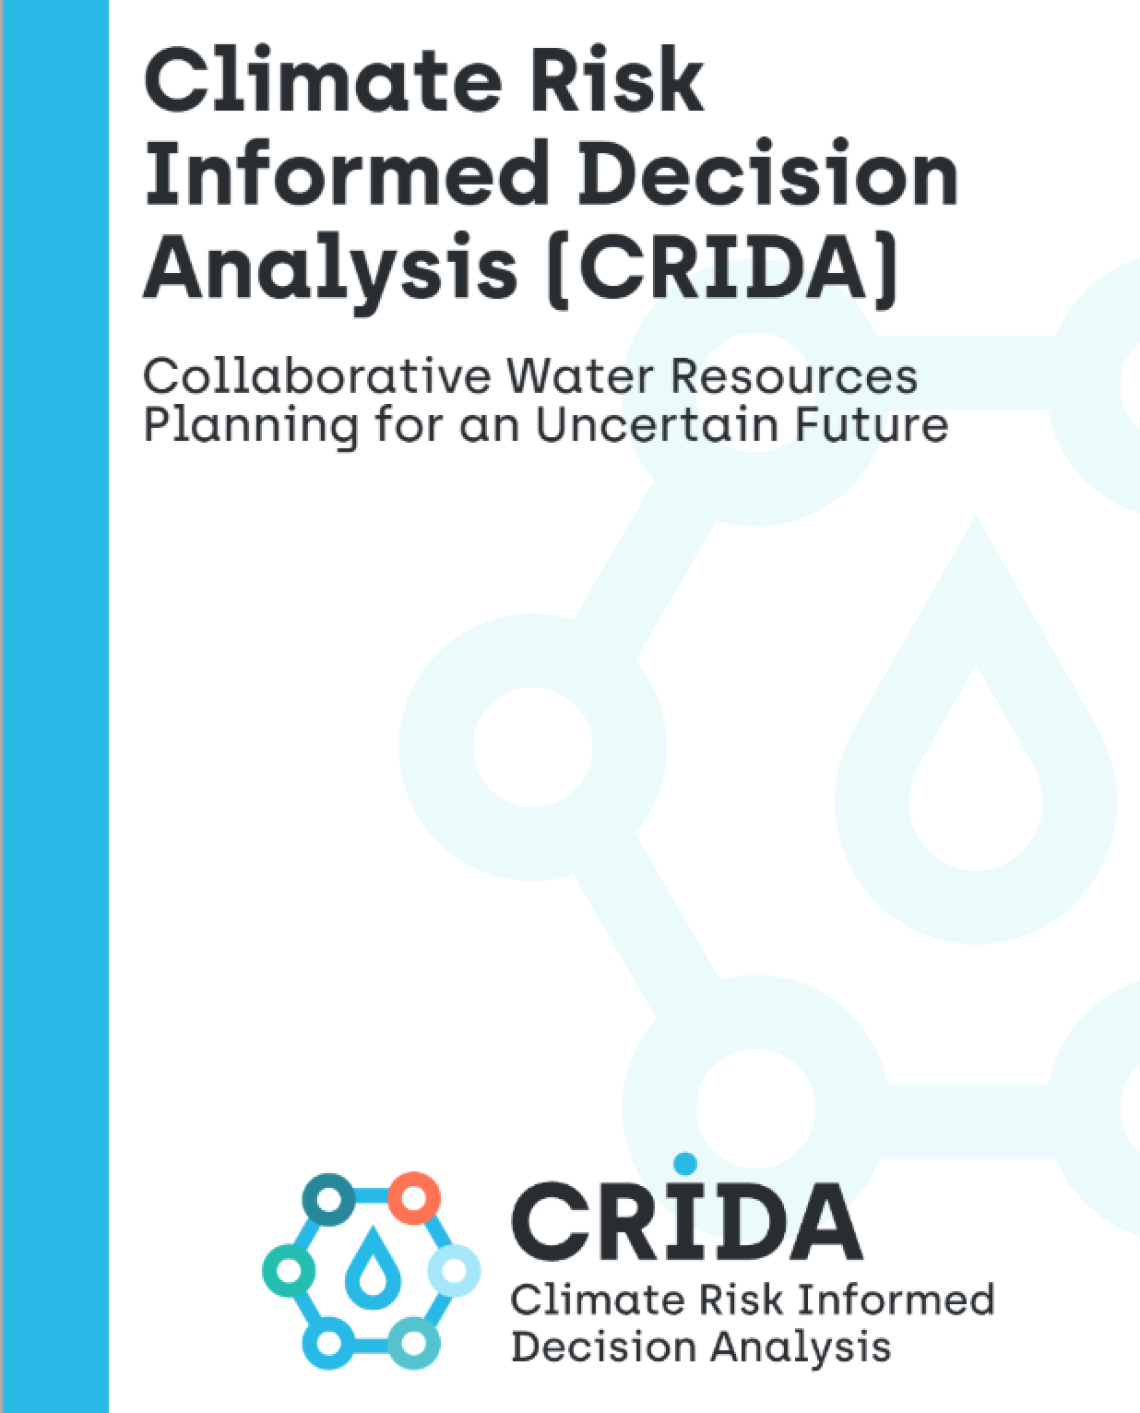 Cover page of CRIDA brochure